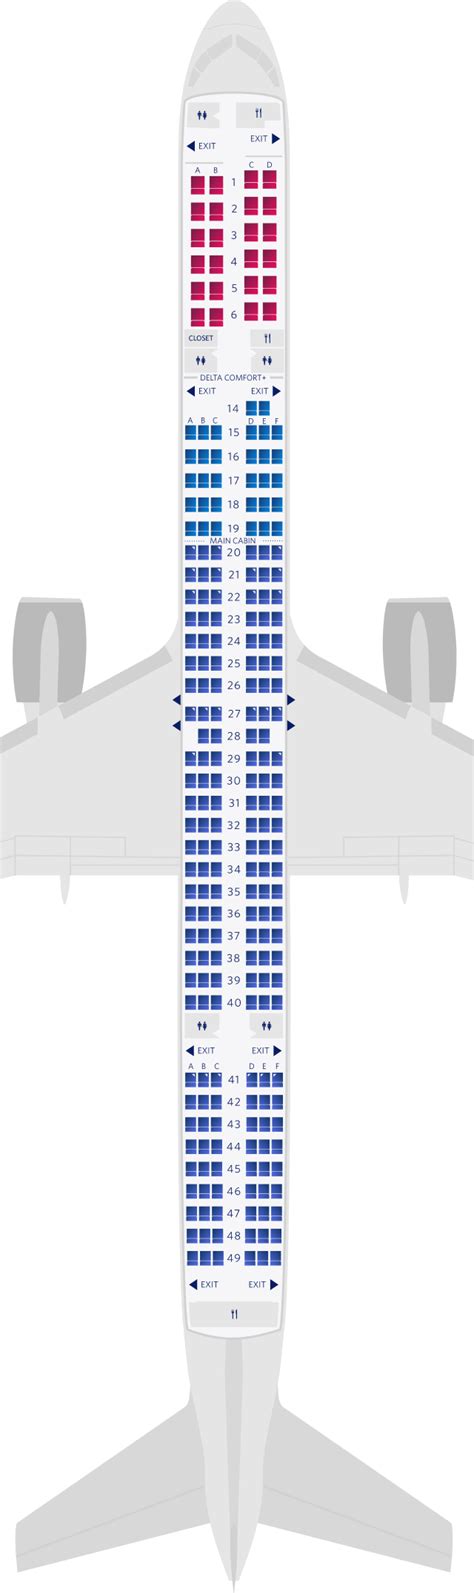 Seat Specs: Business: Pitch 76, Width 21. Economy: Pitch 31, Width 17.3. Economy Plus: Pitch 36, Width 17.3. Guru Tips. The seat map for this United Airlines 757-200 features United's p.s. Premium Service. The aircraft has p.s. Premium flat bed seats, Economy Plus seats featuring extra legroom, and Economy seats.. 